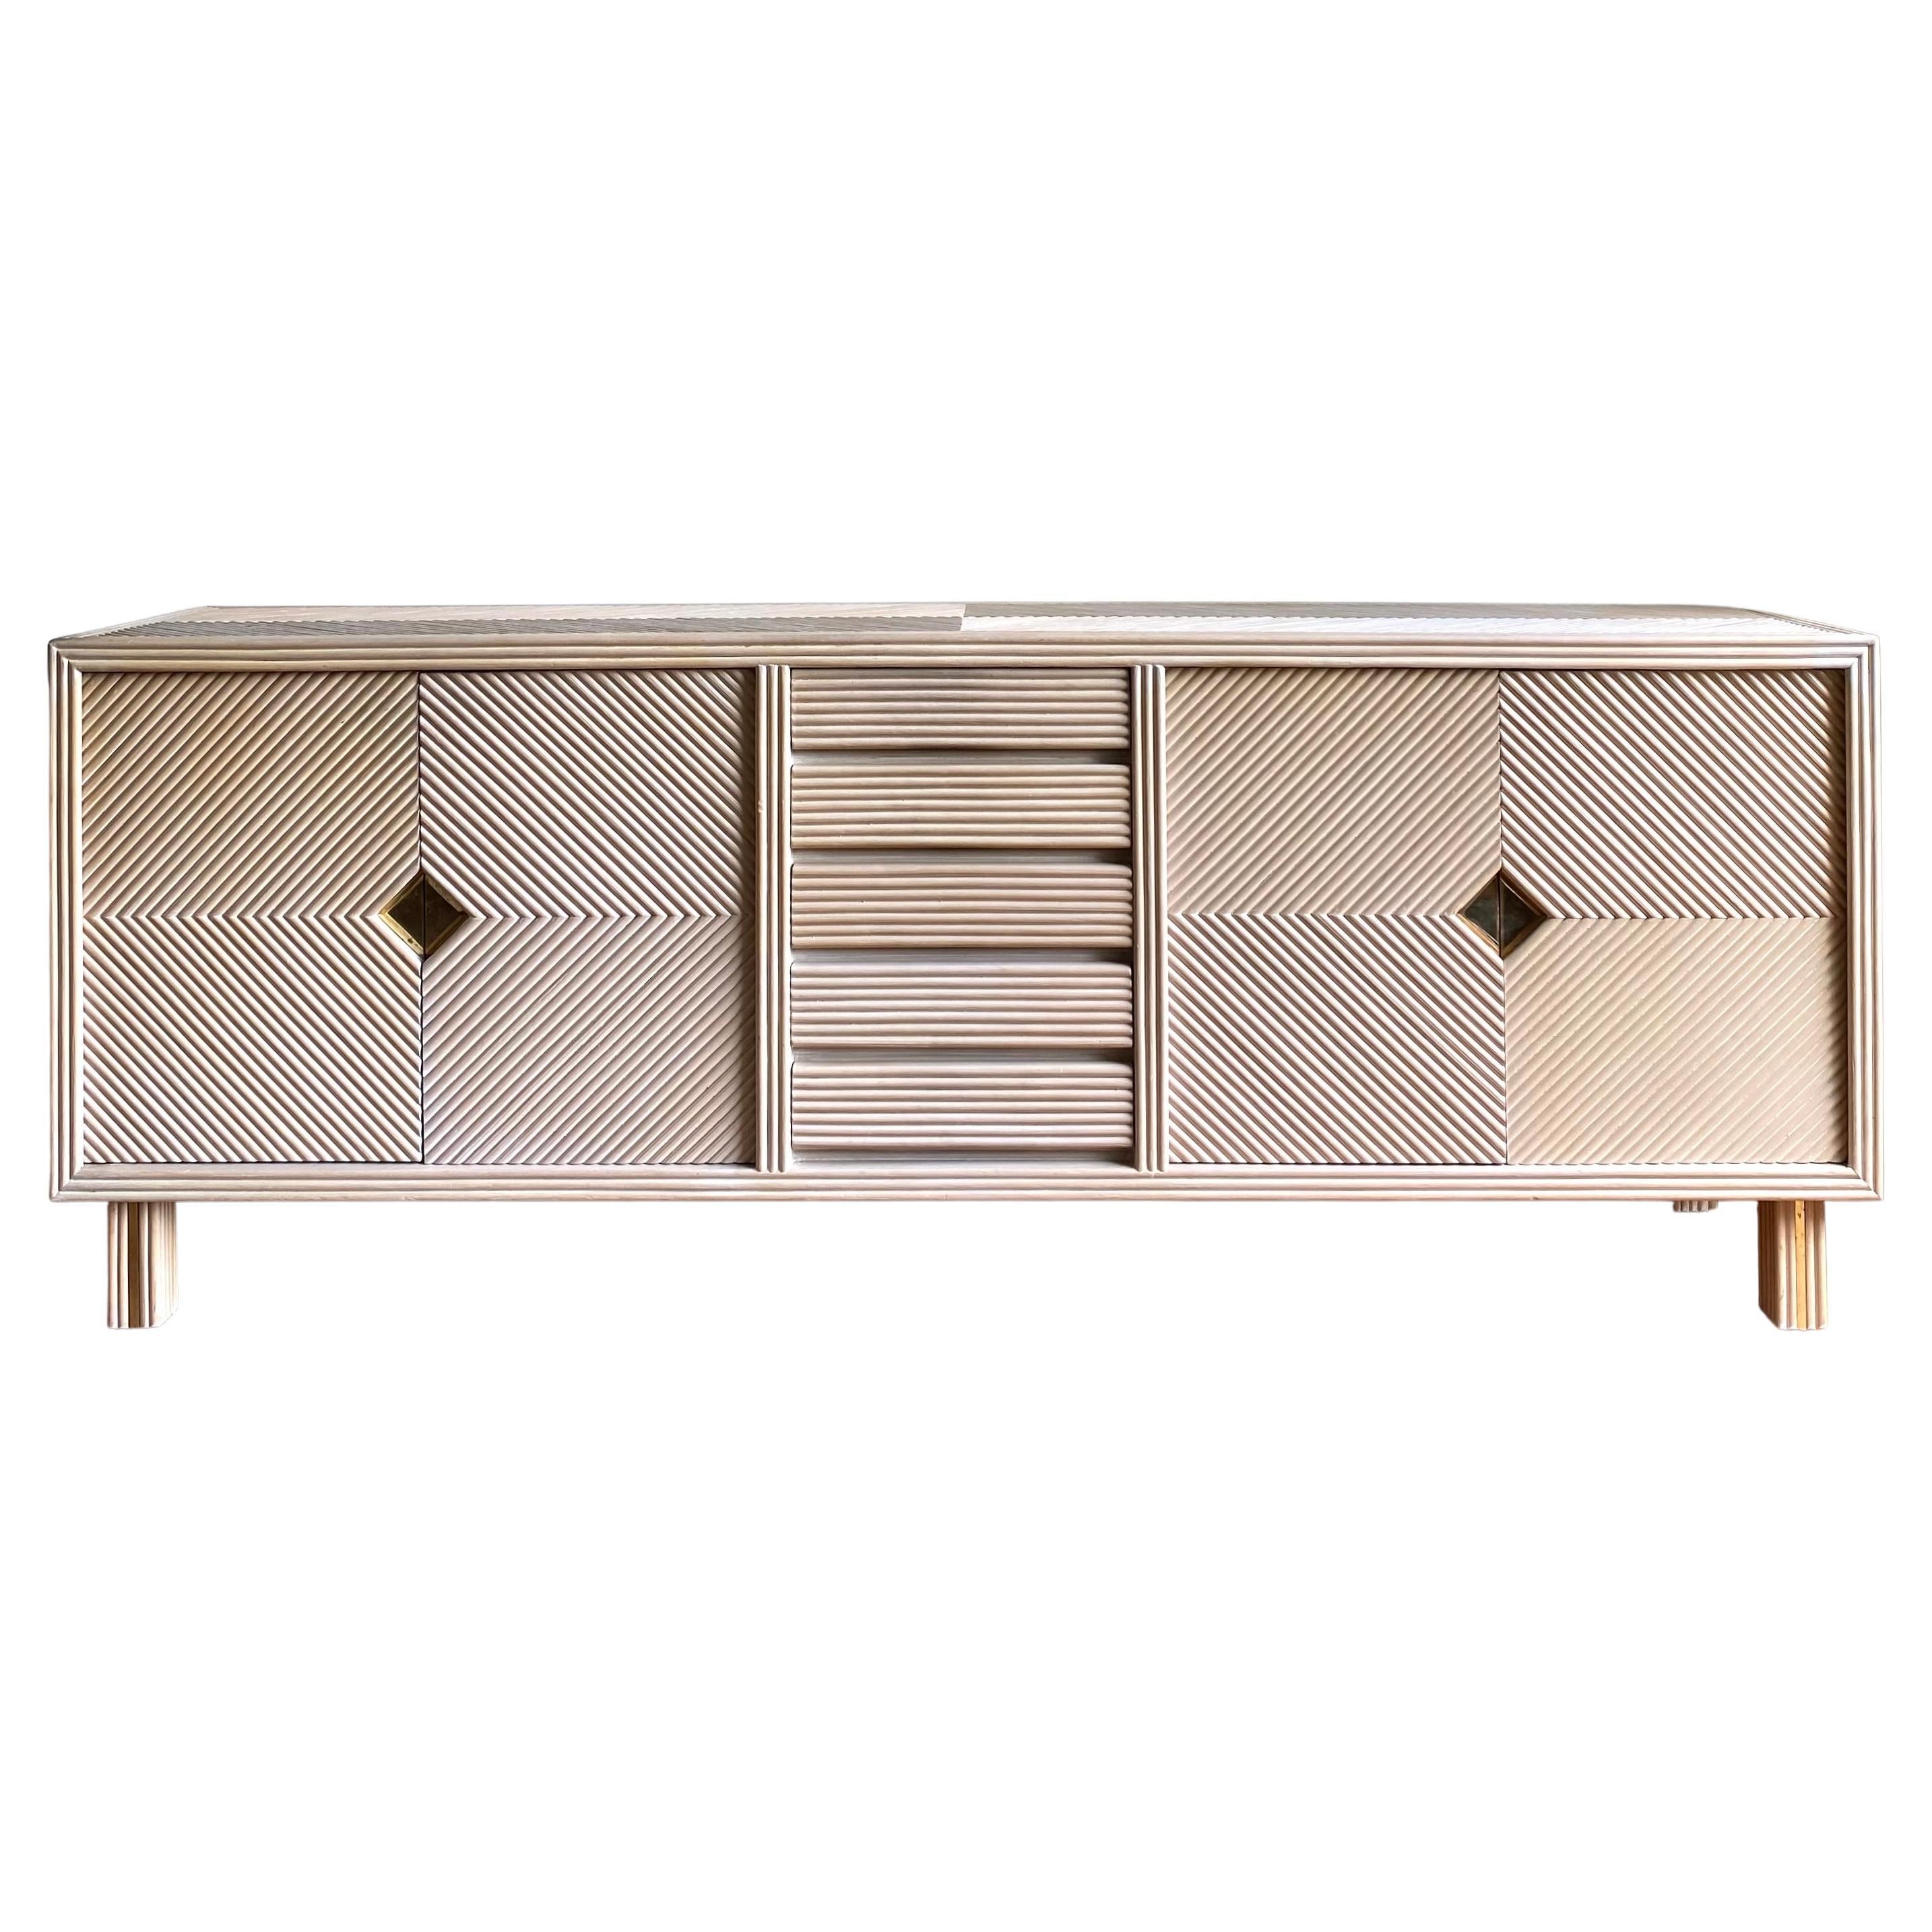 Salmon Colored Sideboard with pencil reed Brass look accents, circa 1970s